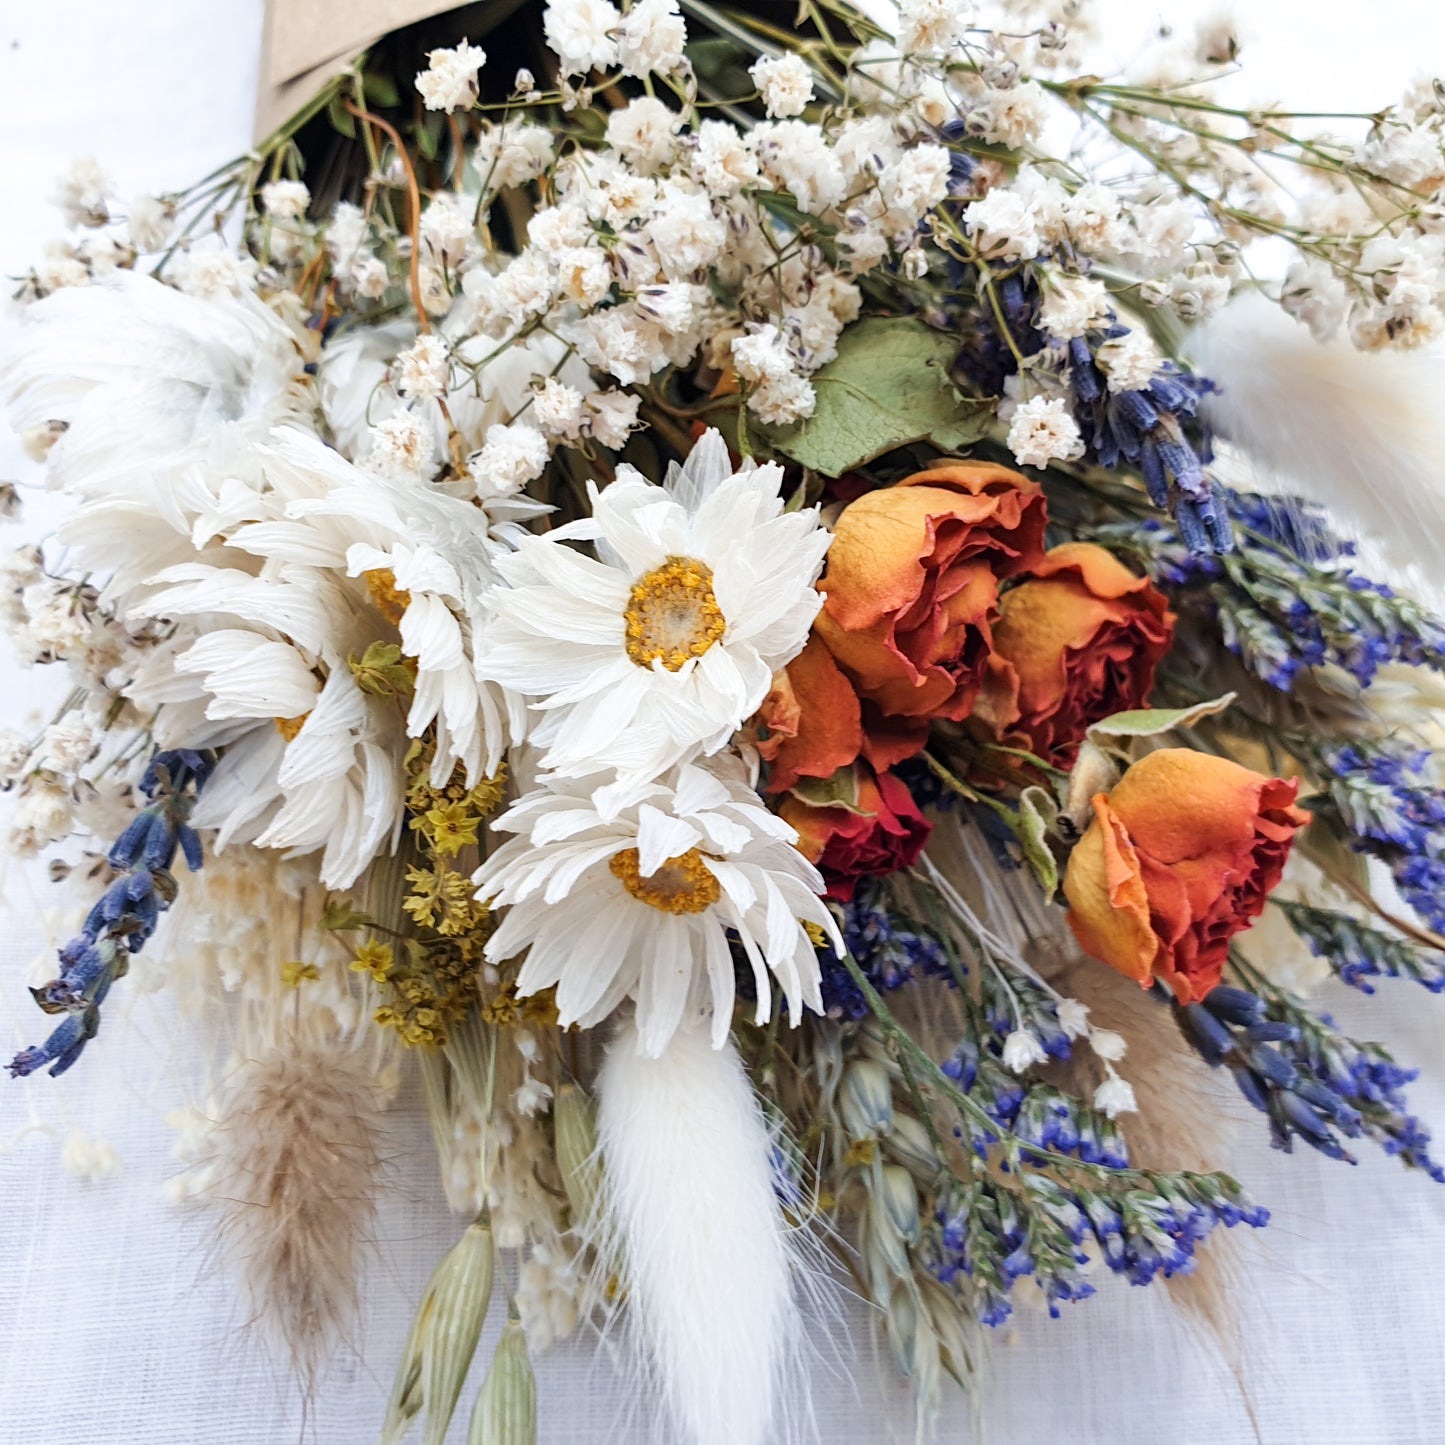 A close up of the dried flower bouquet. You can see in detail the orange spray roses, crisp white daisies with yellow centres, purple blue toned sea lavender and frothy white gypsophila among other grasses and fillers. You can see the pretty colouration of the orange roses, fading from a vibrant tomato red to orange to a golden apricot shade at the base. 